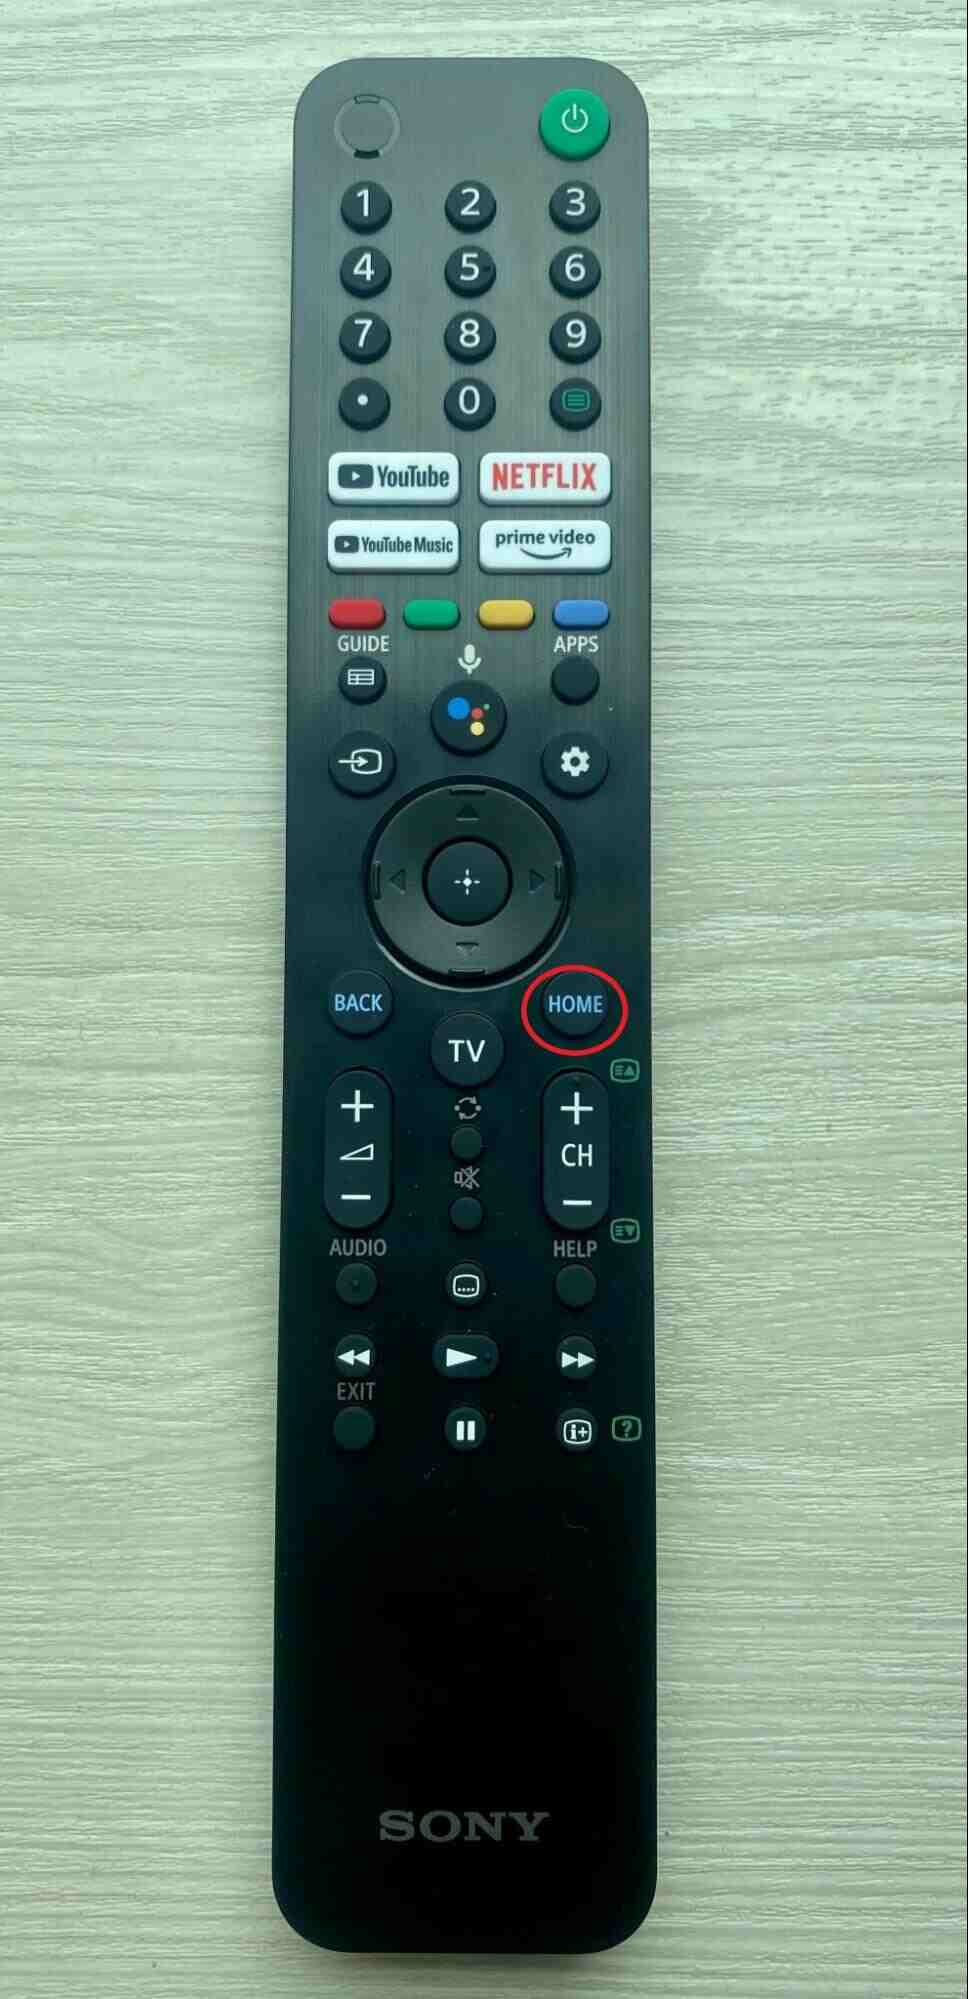 Home button on Sony TV remote